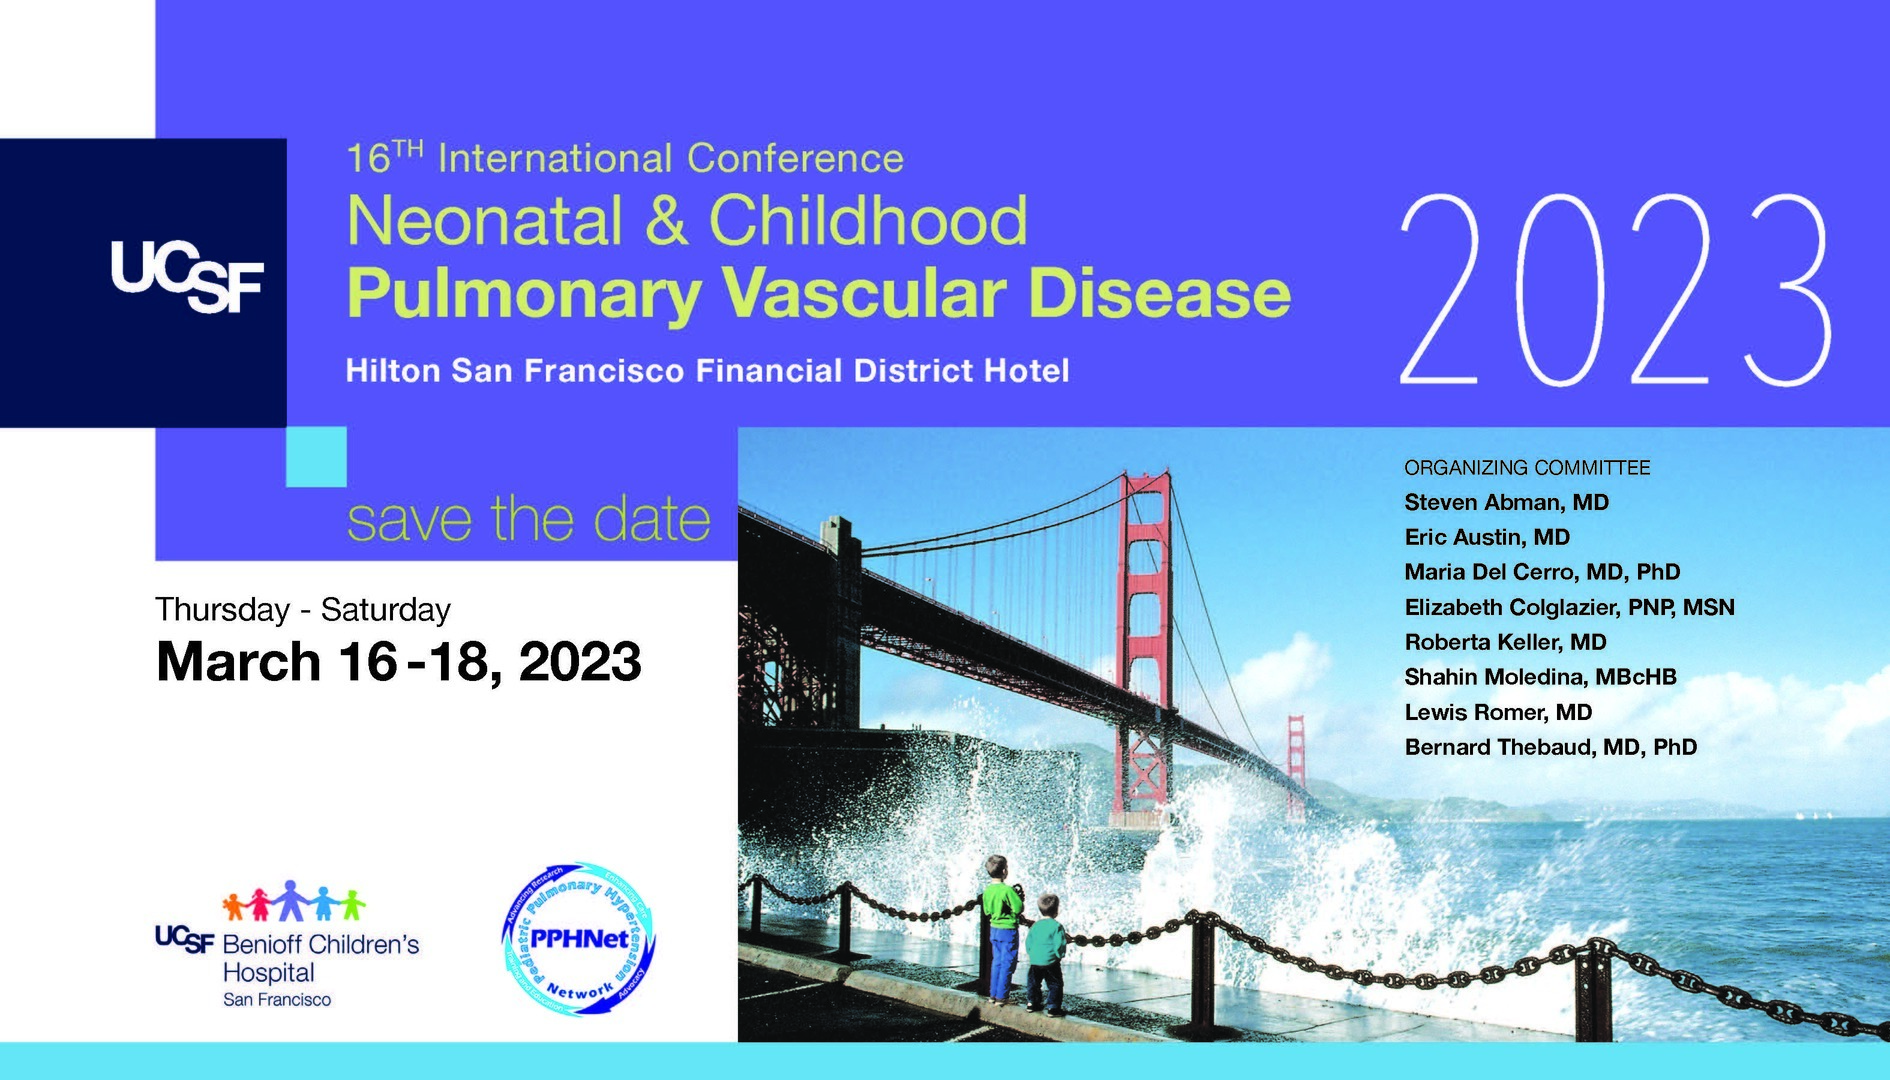 UCSF's16th International Conference Neonatal and Childhood Pulmonary Vascular Disease 2023, San Francisco, California, United States